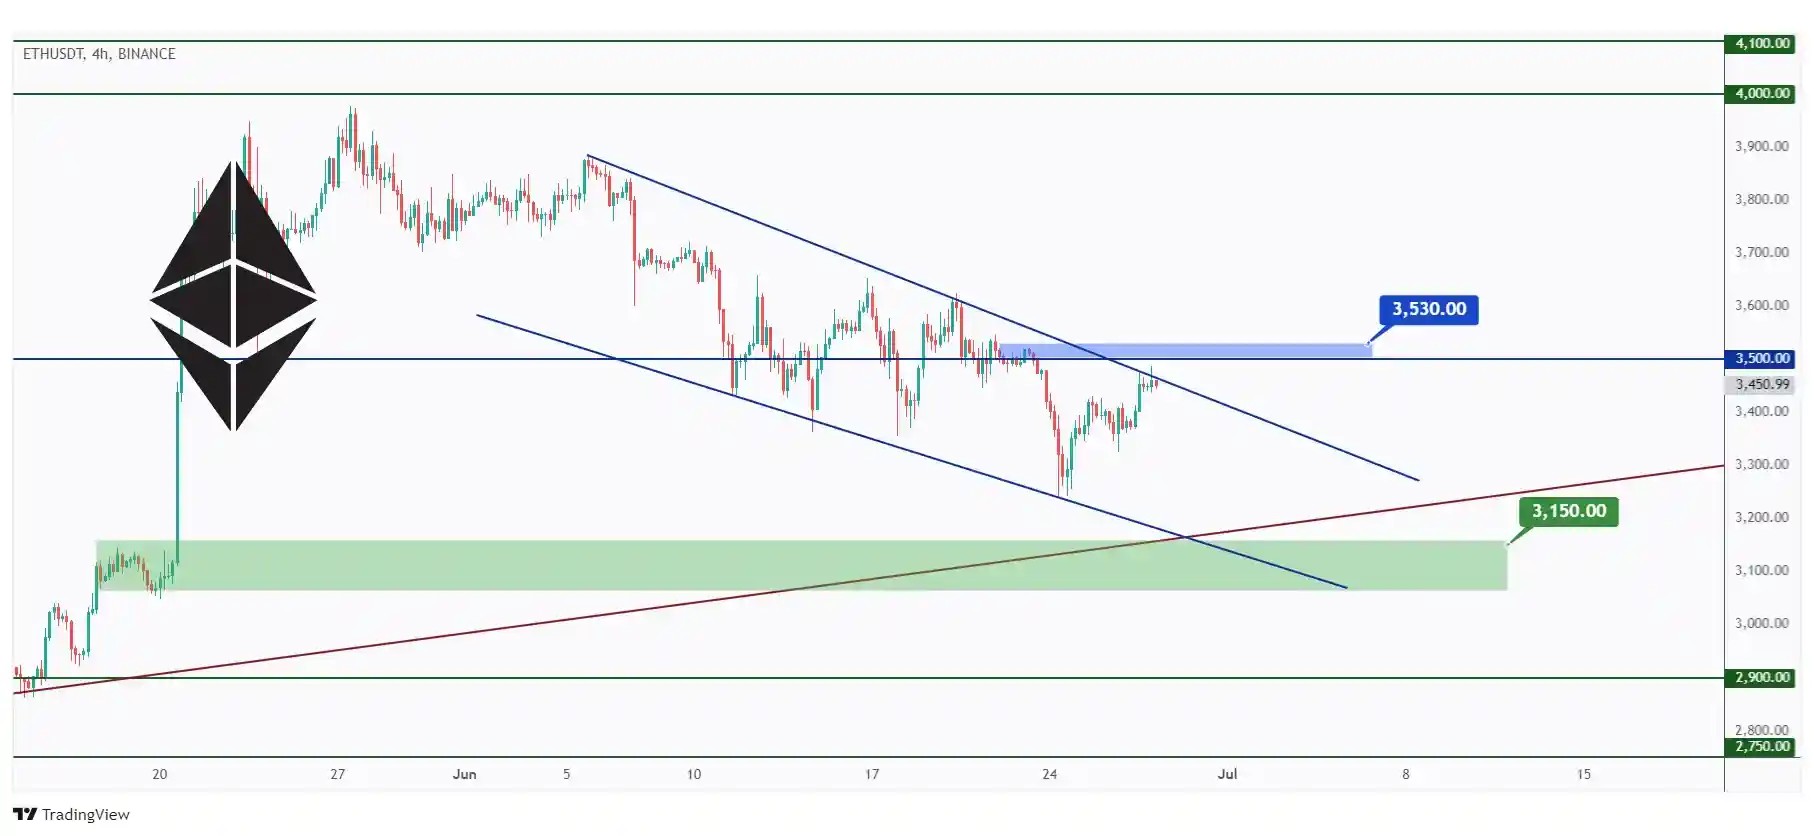 ETH 4h chart overall bearish trading within a falling wedge pattern as long as the last major high at $3,530 high holds.